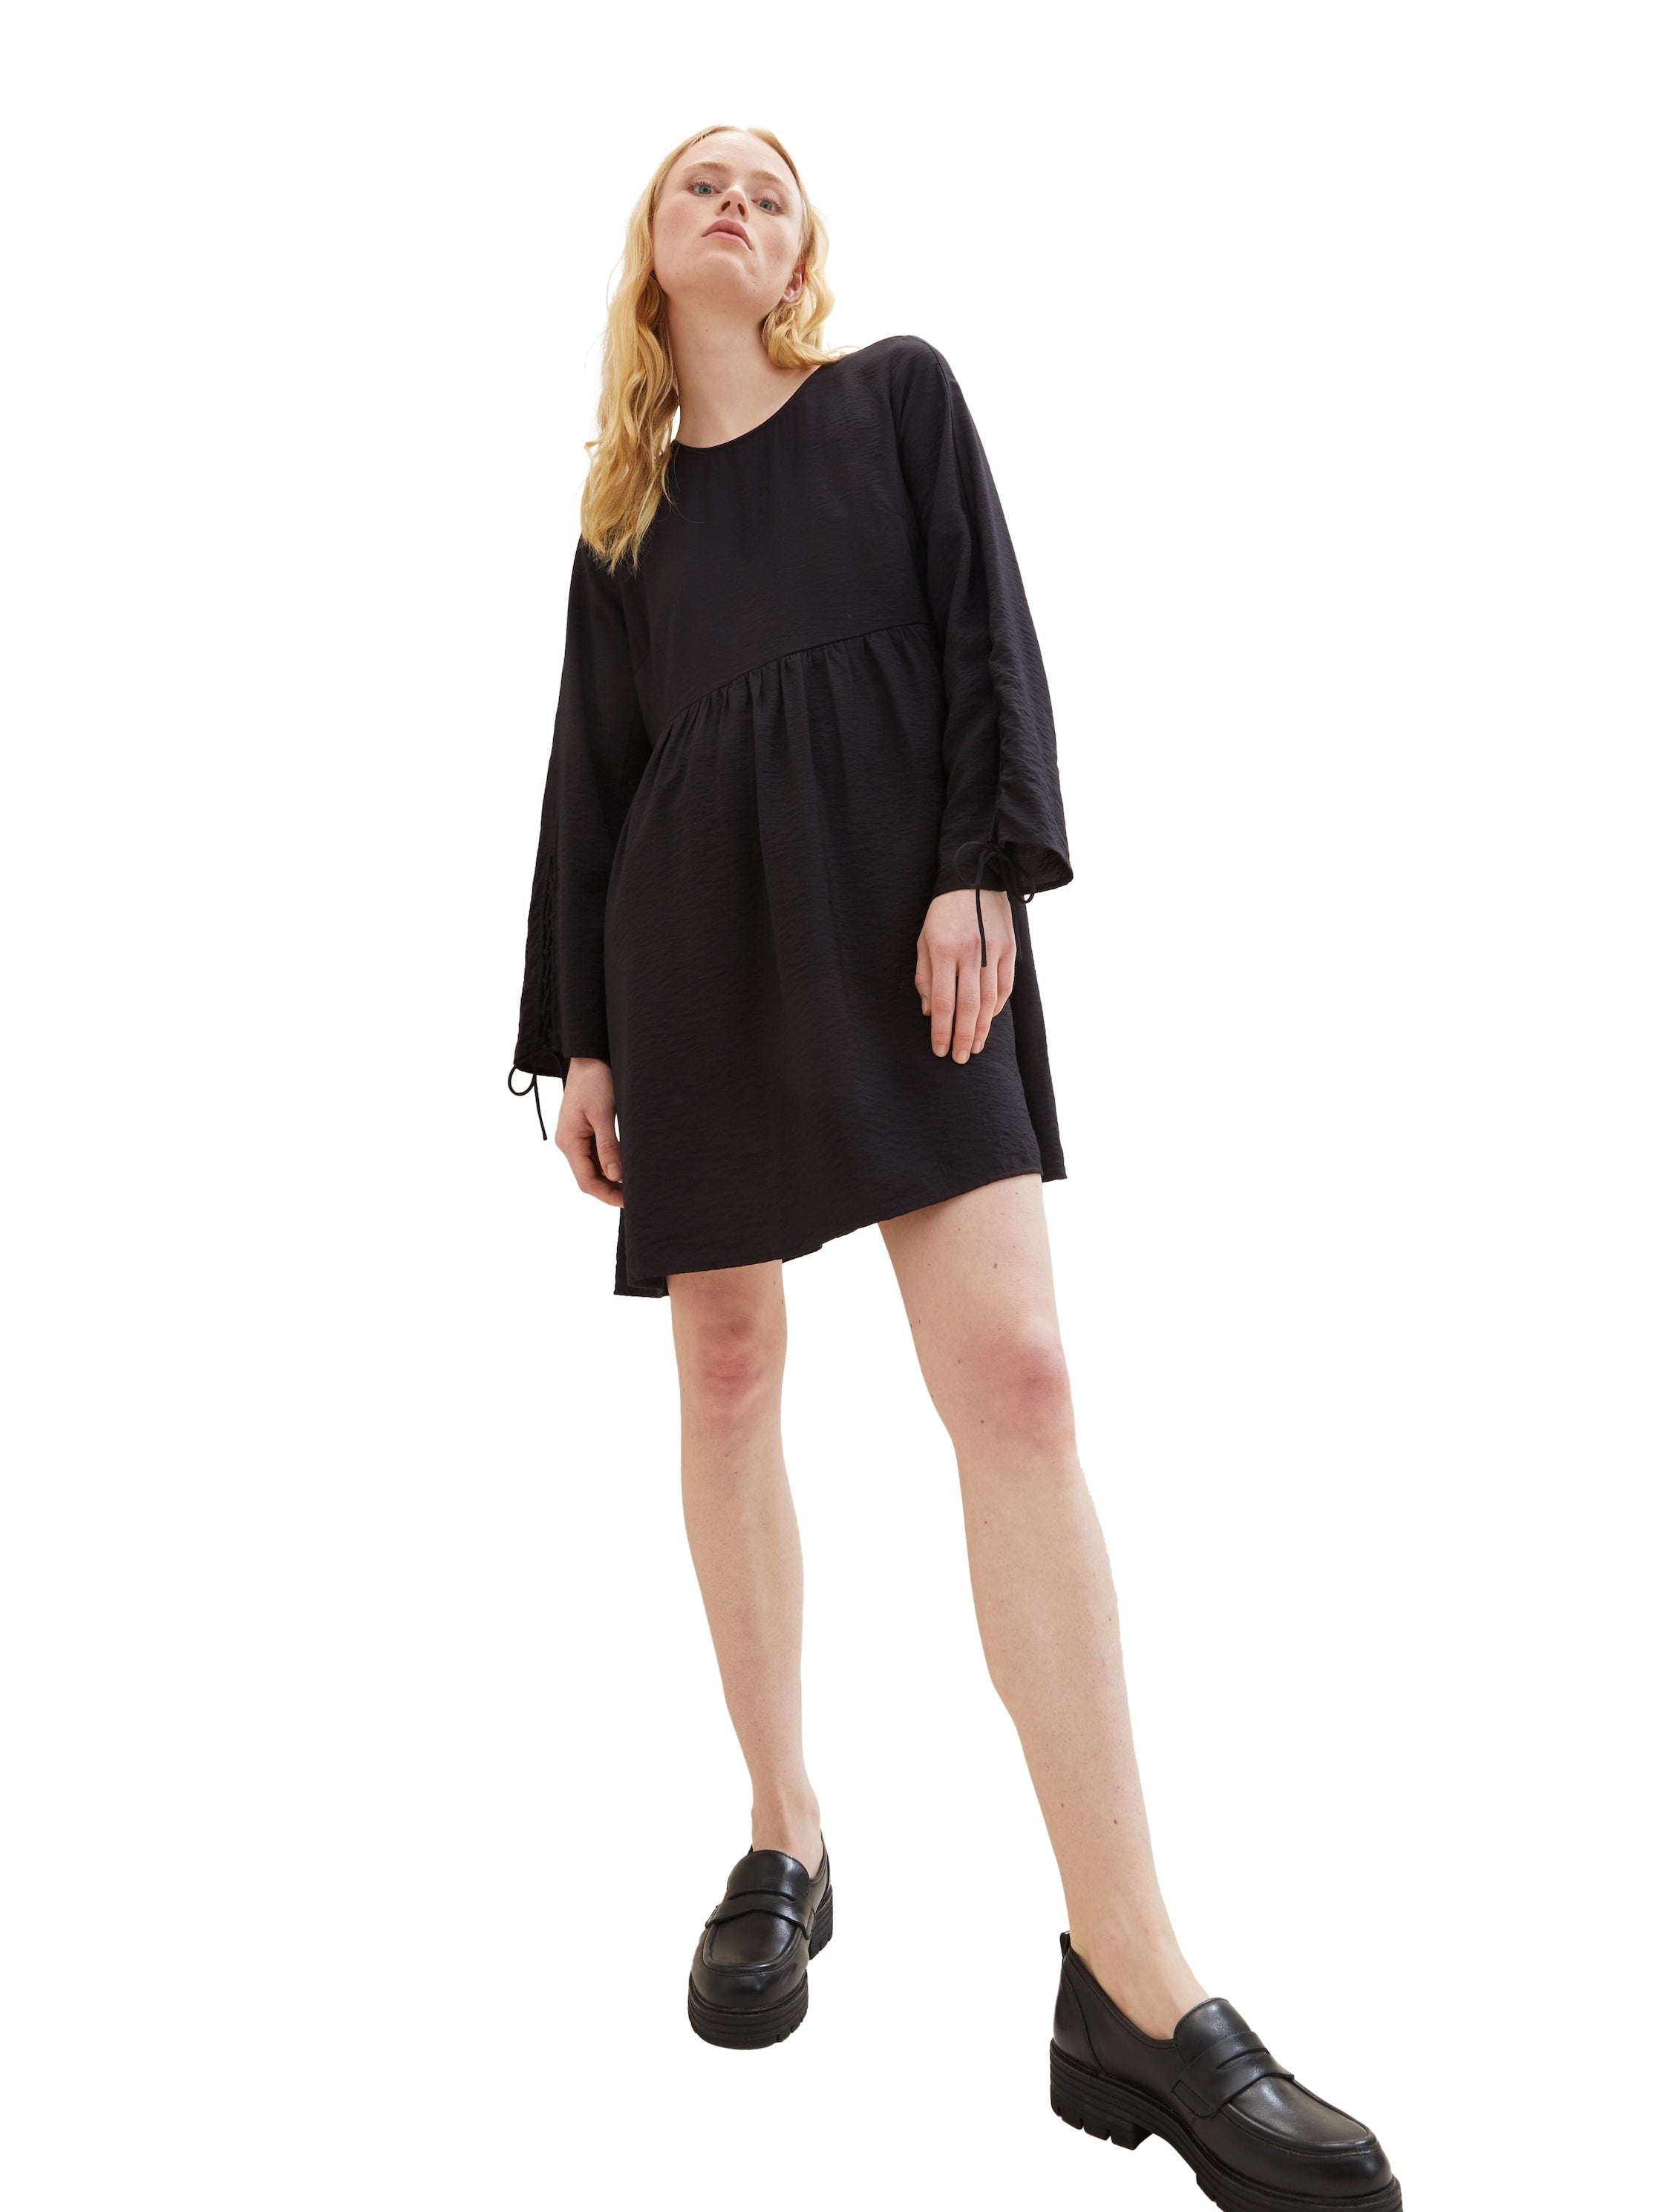 Loose Fit Short Dress With Adjustable Sleeves_1038142_14482_02